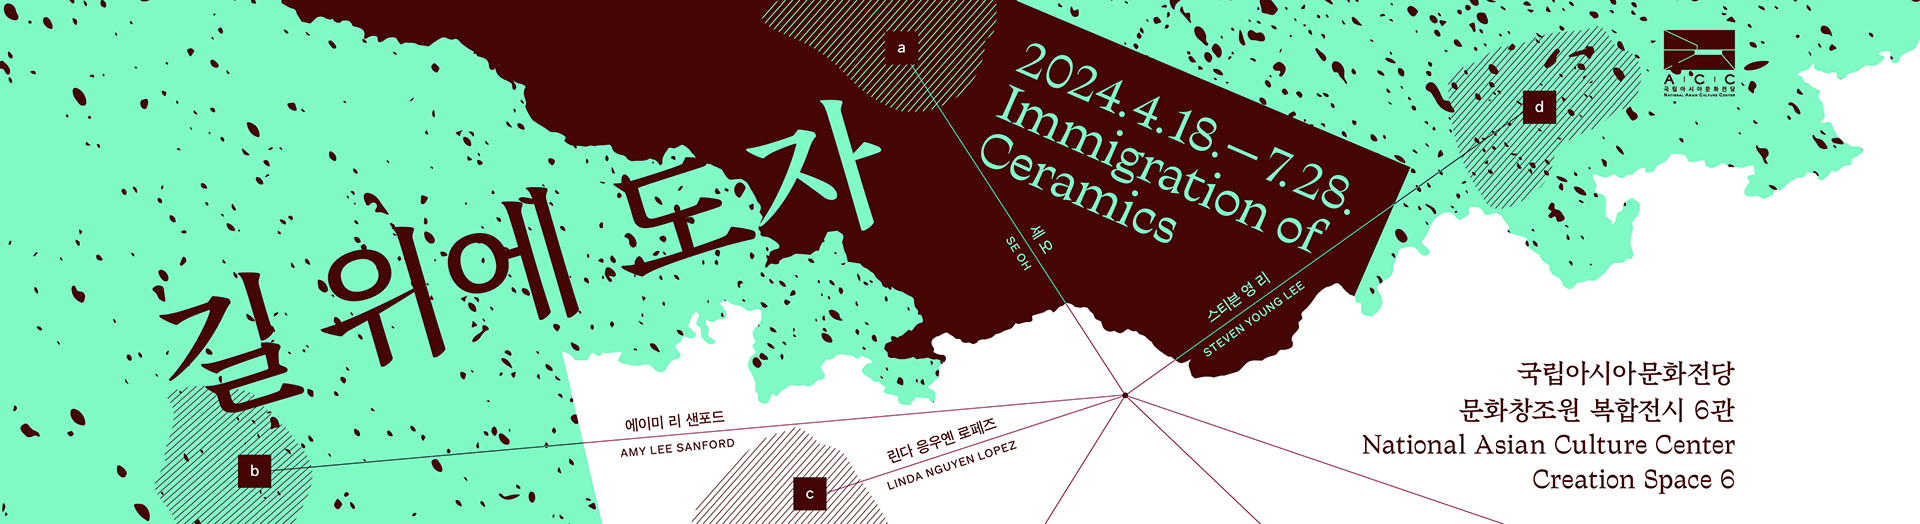 ACC Asia Network “Immigration on Ceramics”